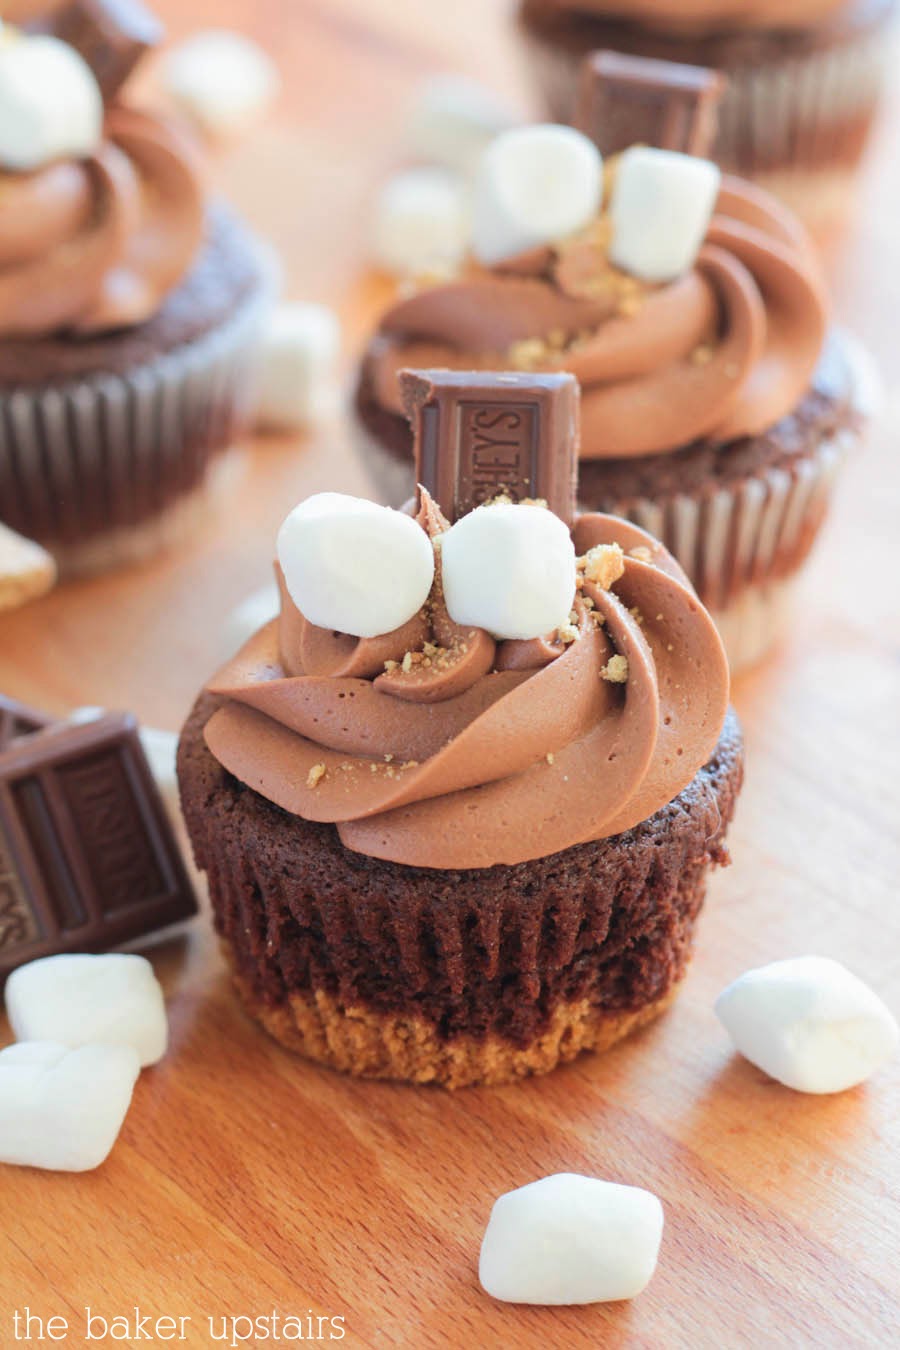 These delicious s'mores cupcakes have all the flavors you love in s'mores, but in a fun cupcake form!